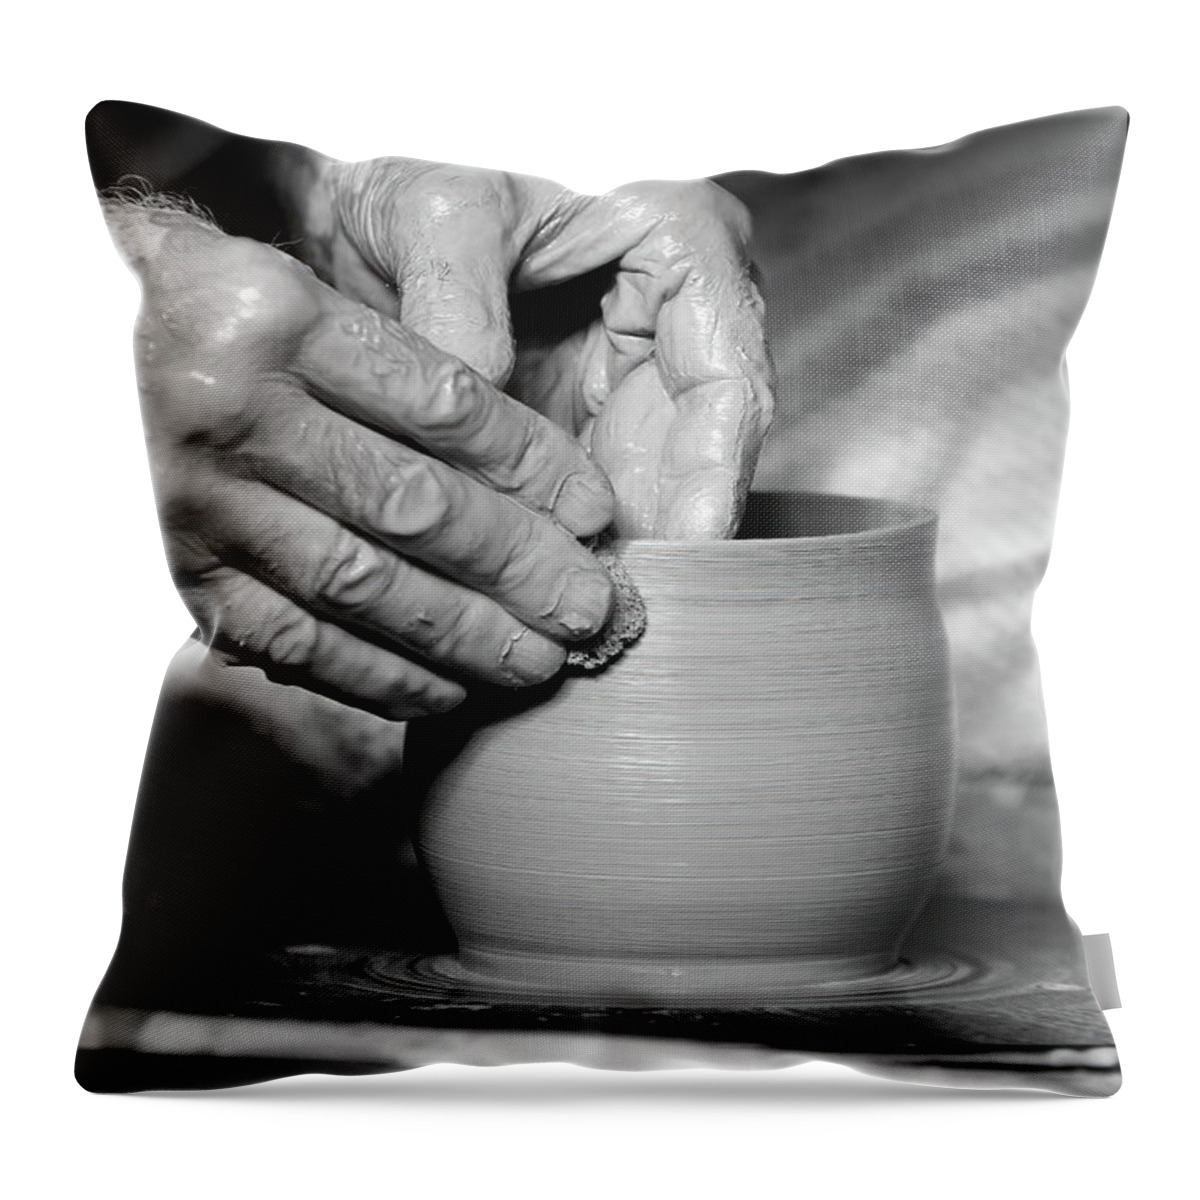 Ceramic Throw Pillow featuring the photograph The Potter's Hands bw by Lens Art Photography By Larry Trager